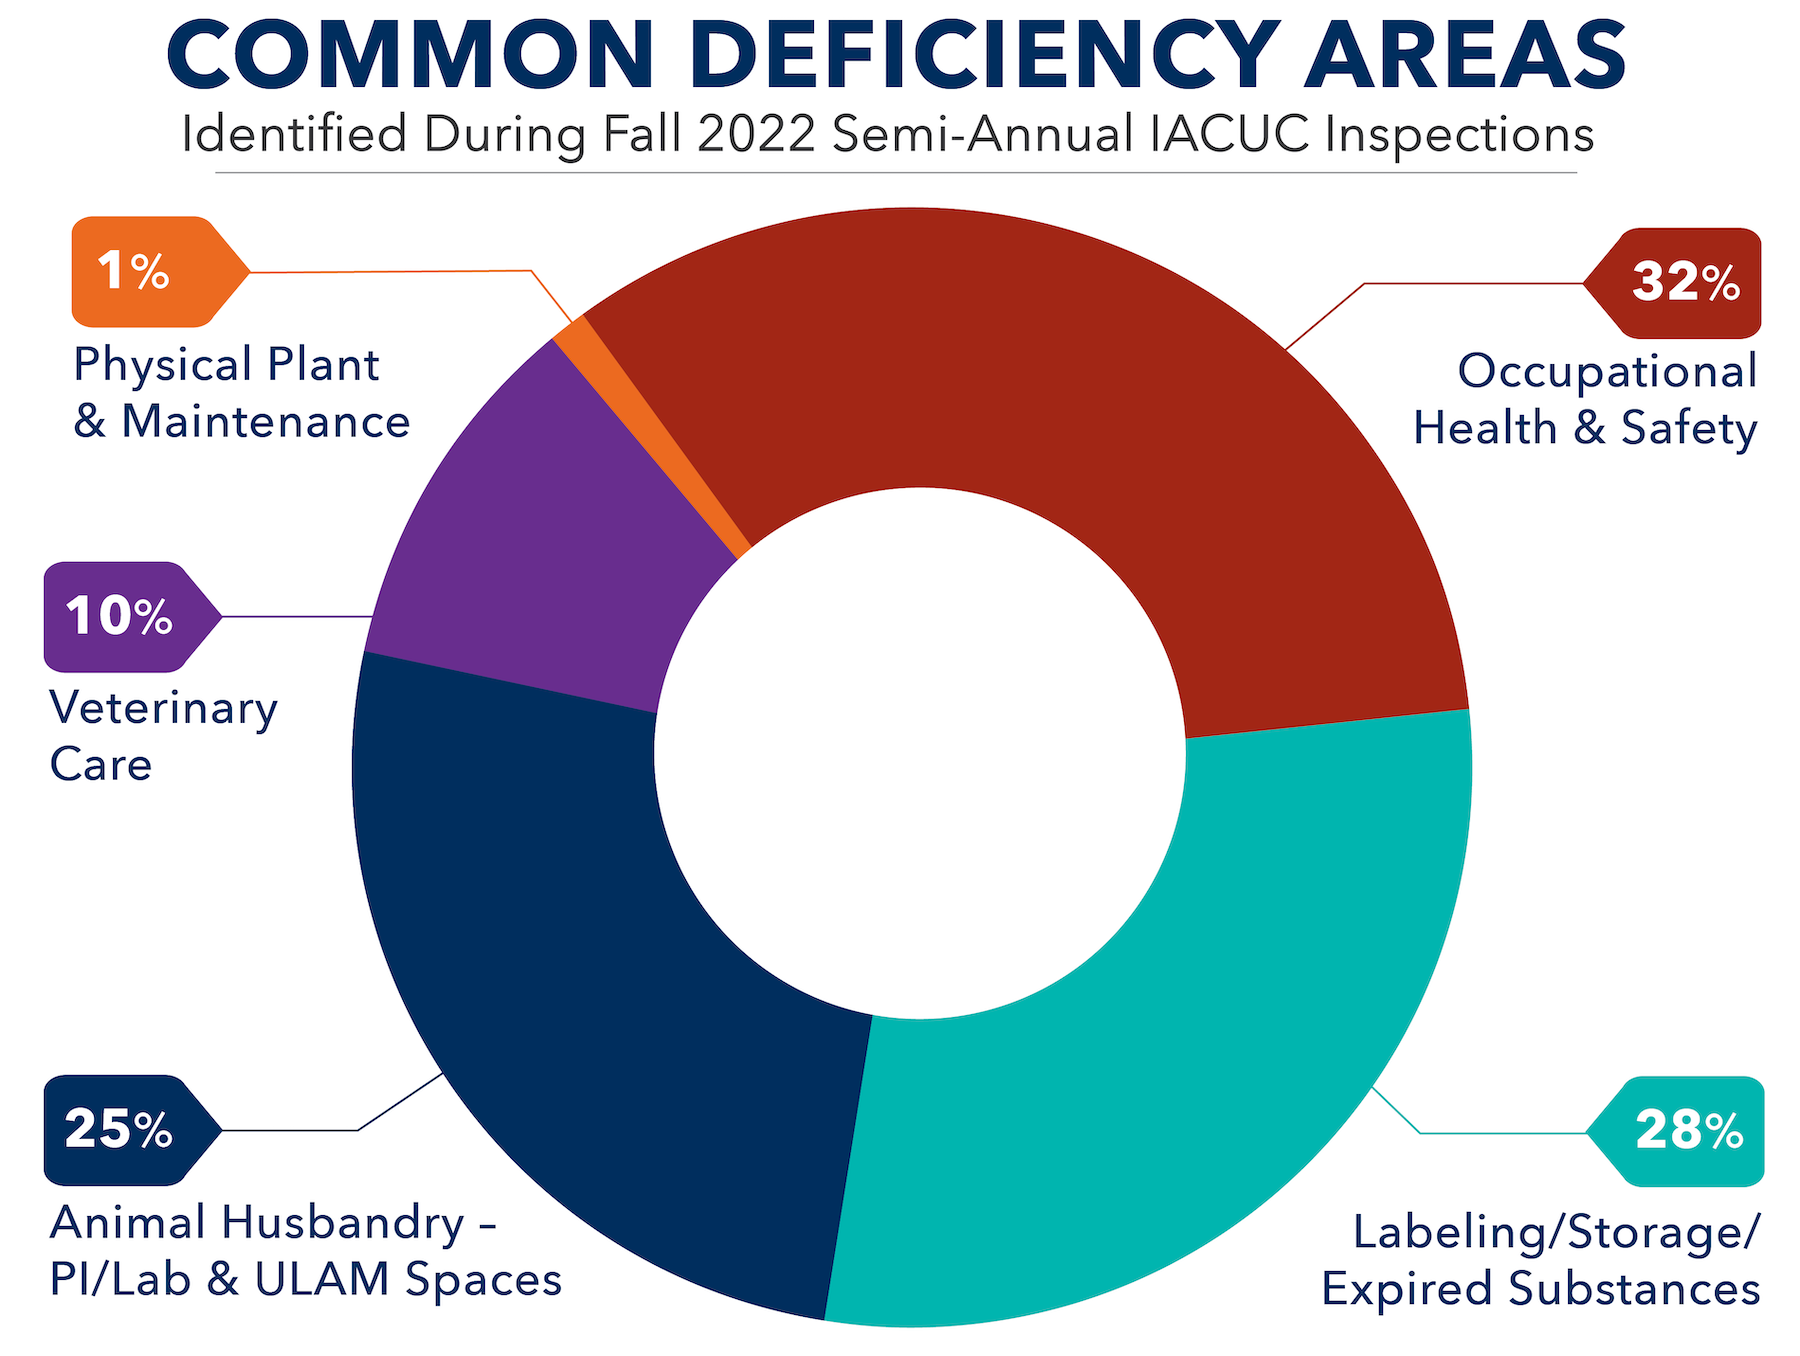 Multi-colored graph showing common deficiency areas identified during Fall 2022 semi-annual facility inspections